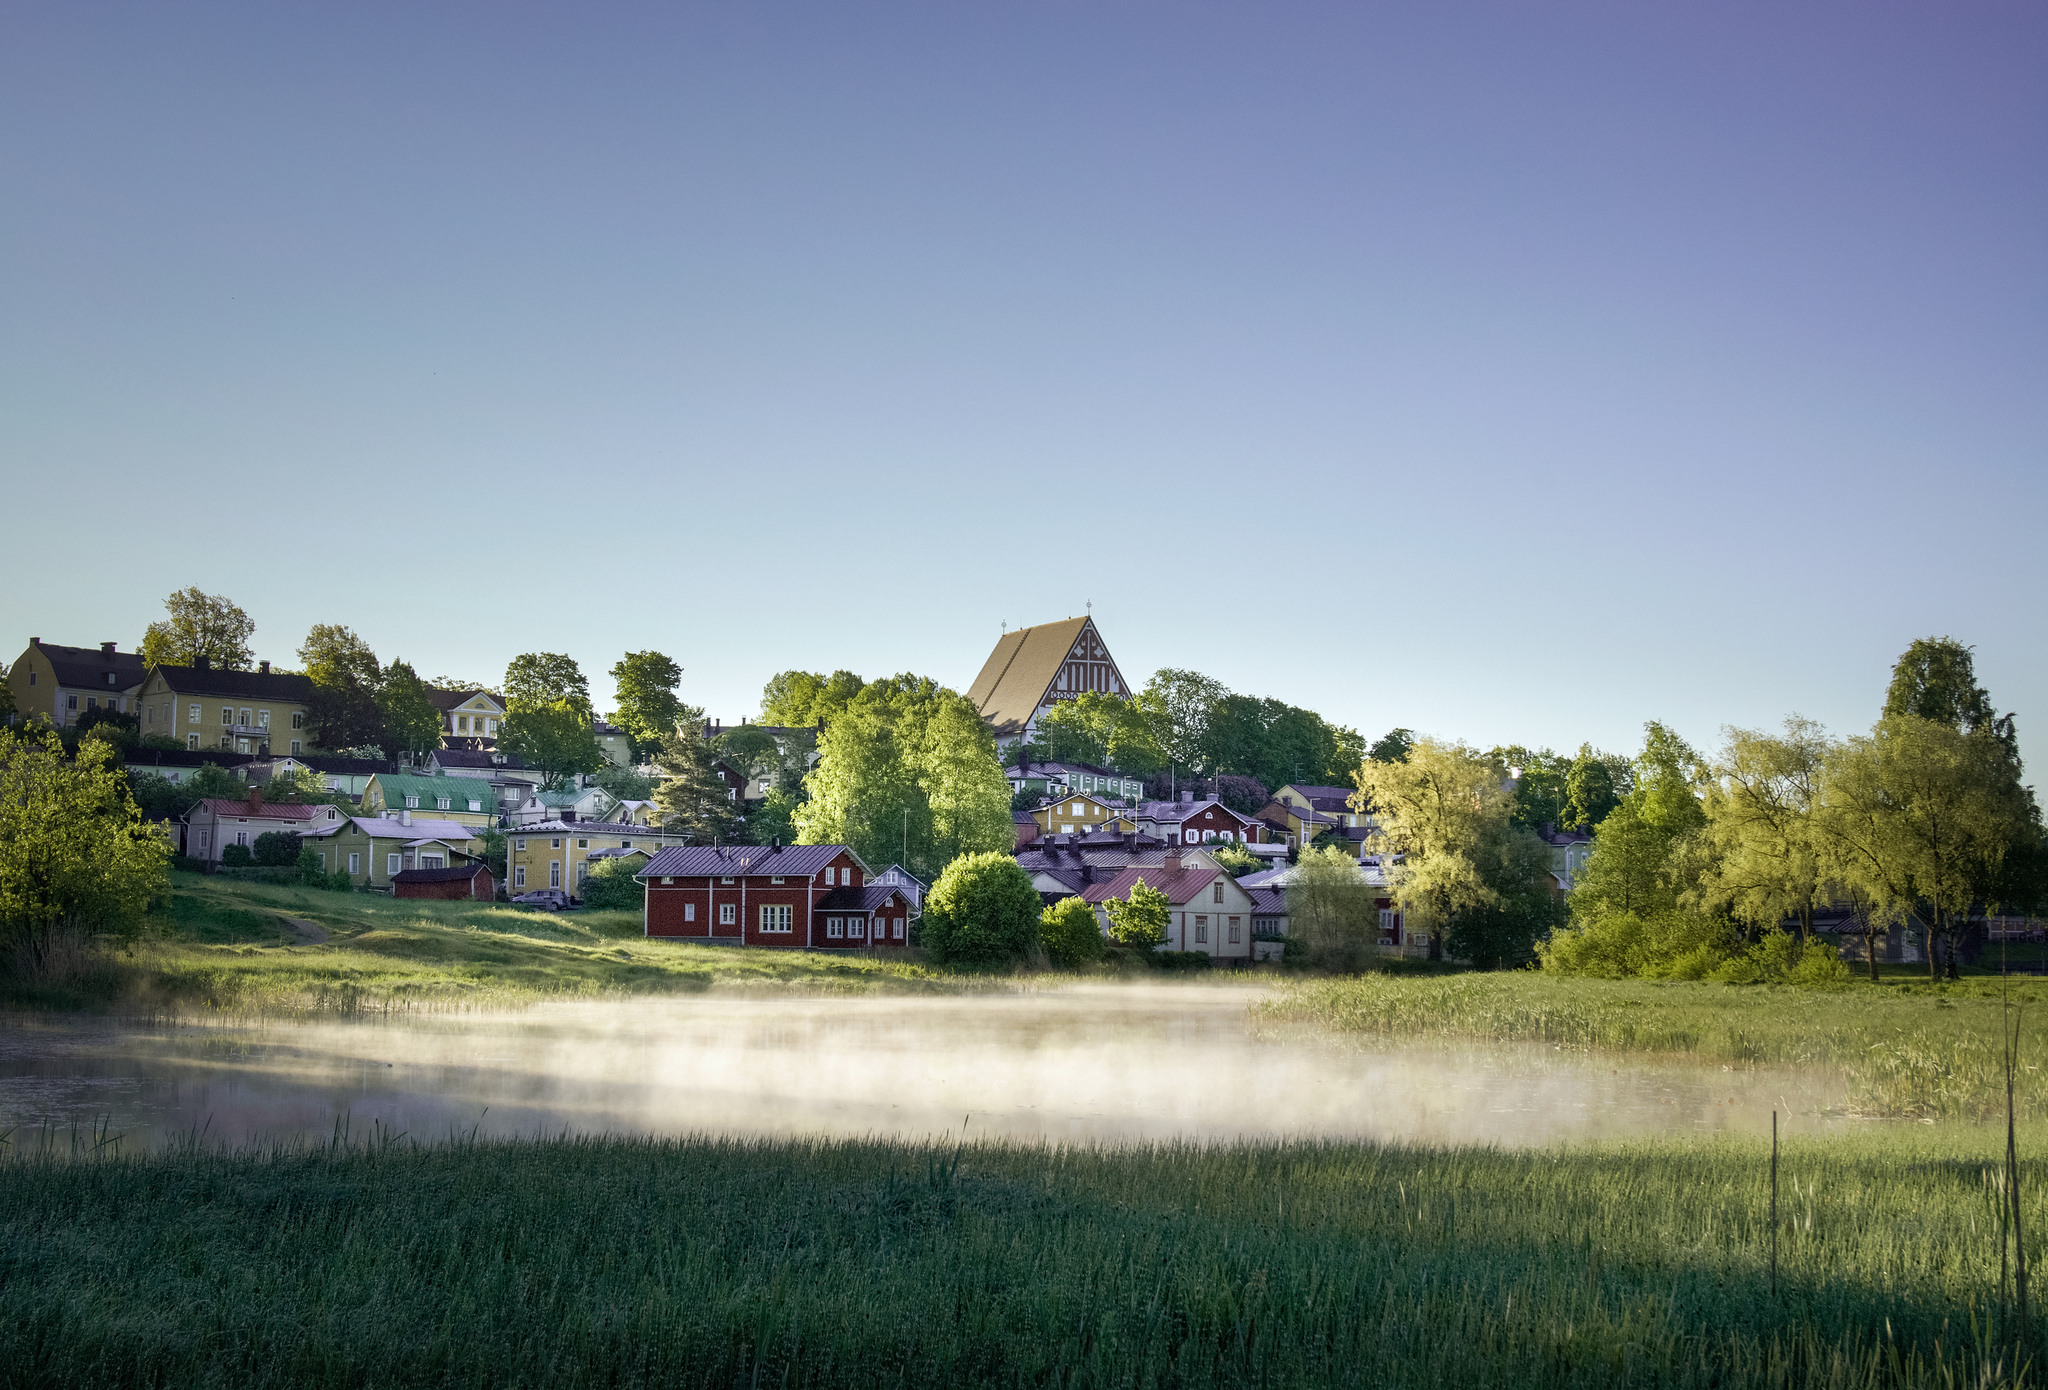 Old Porvoo seen from across the river, with morning mist over the river, and trees are bright green in the spring.